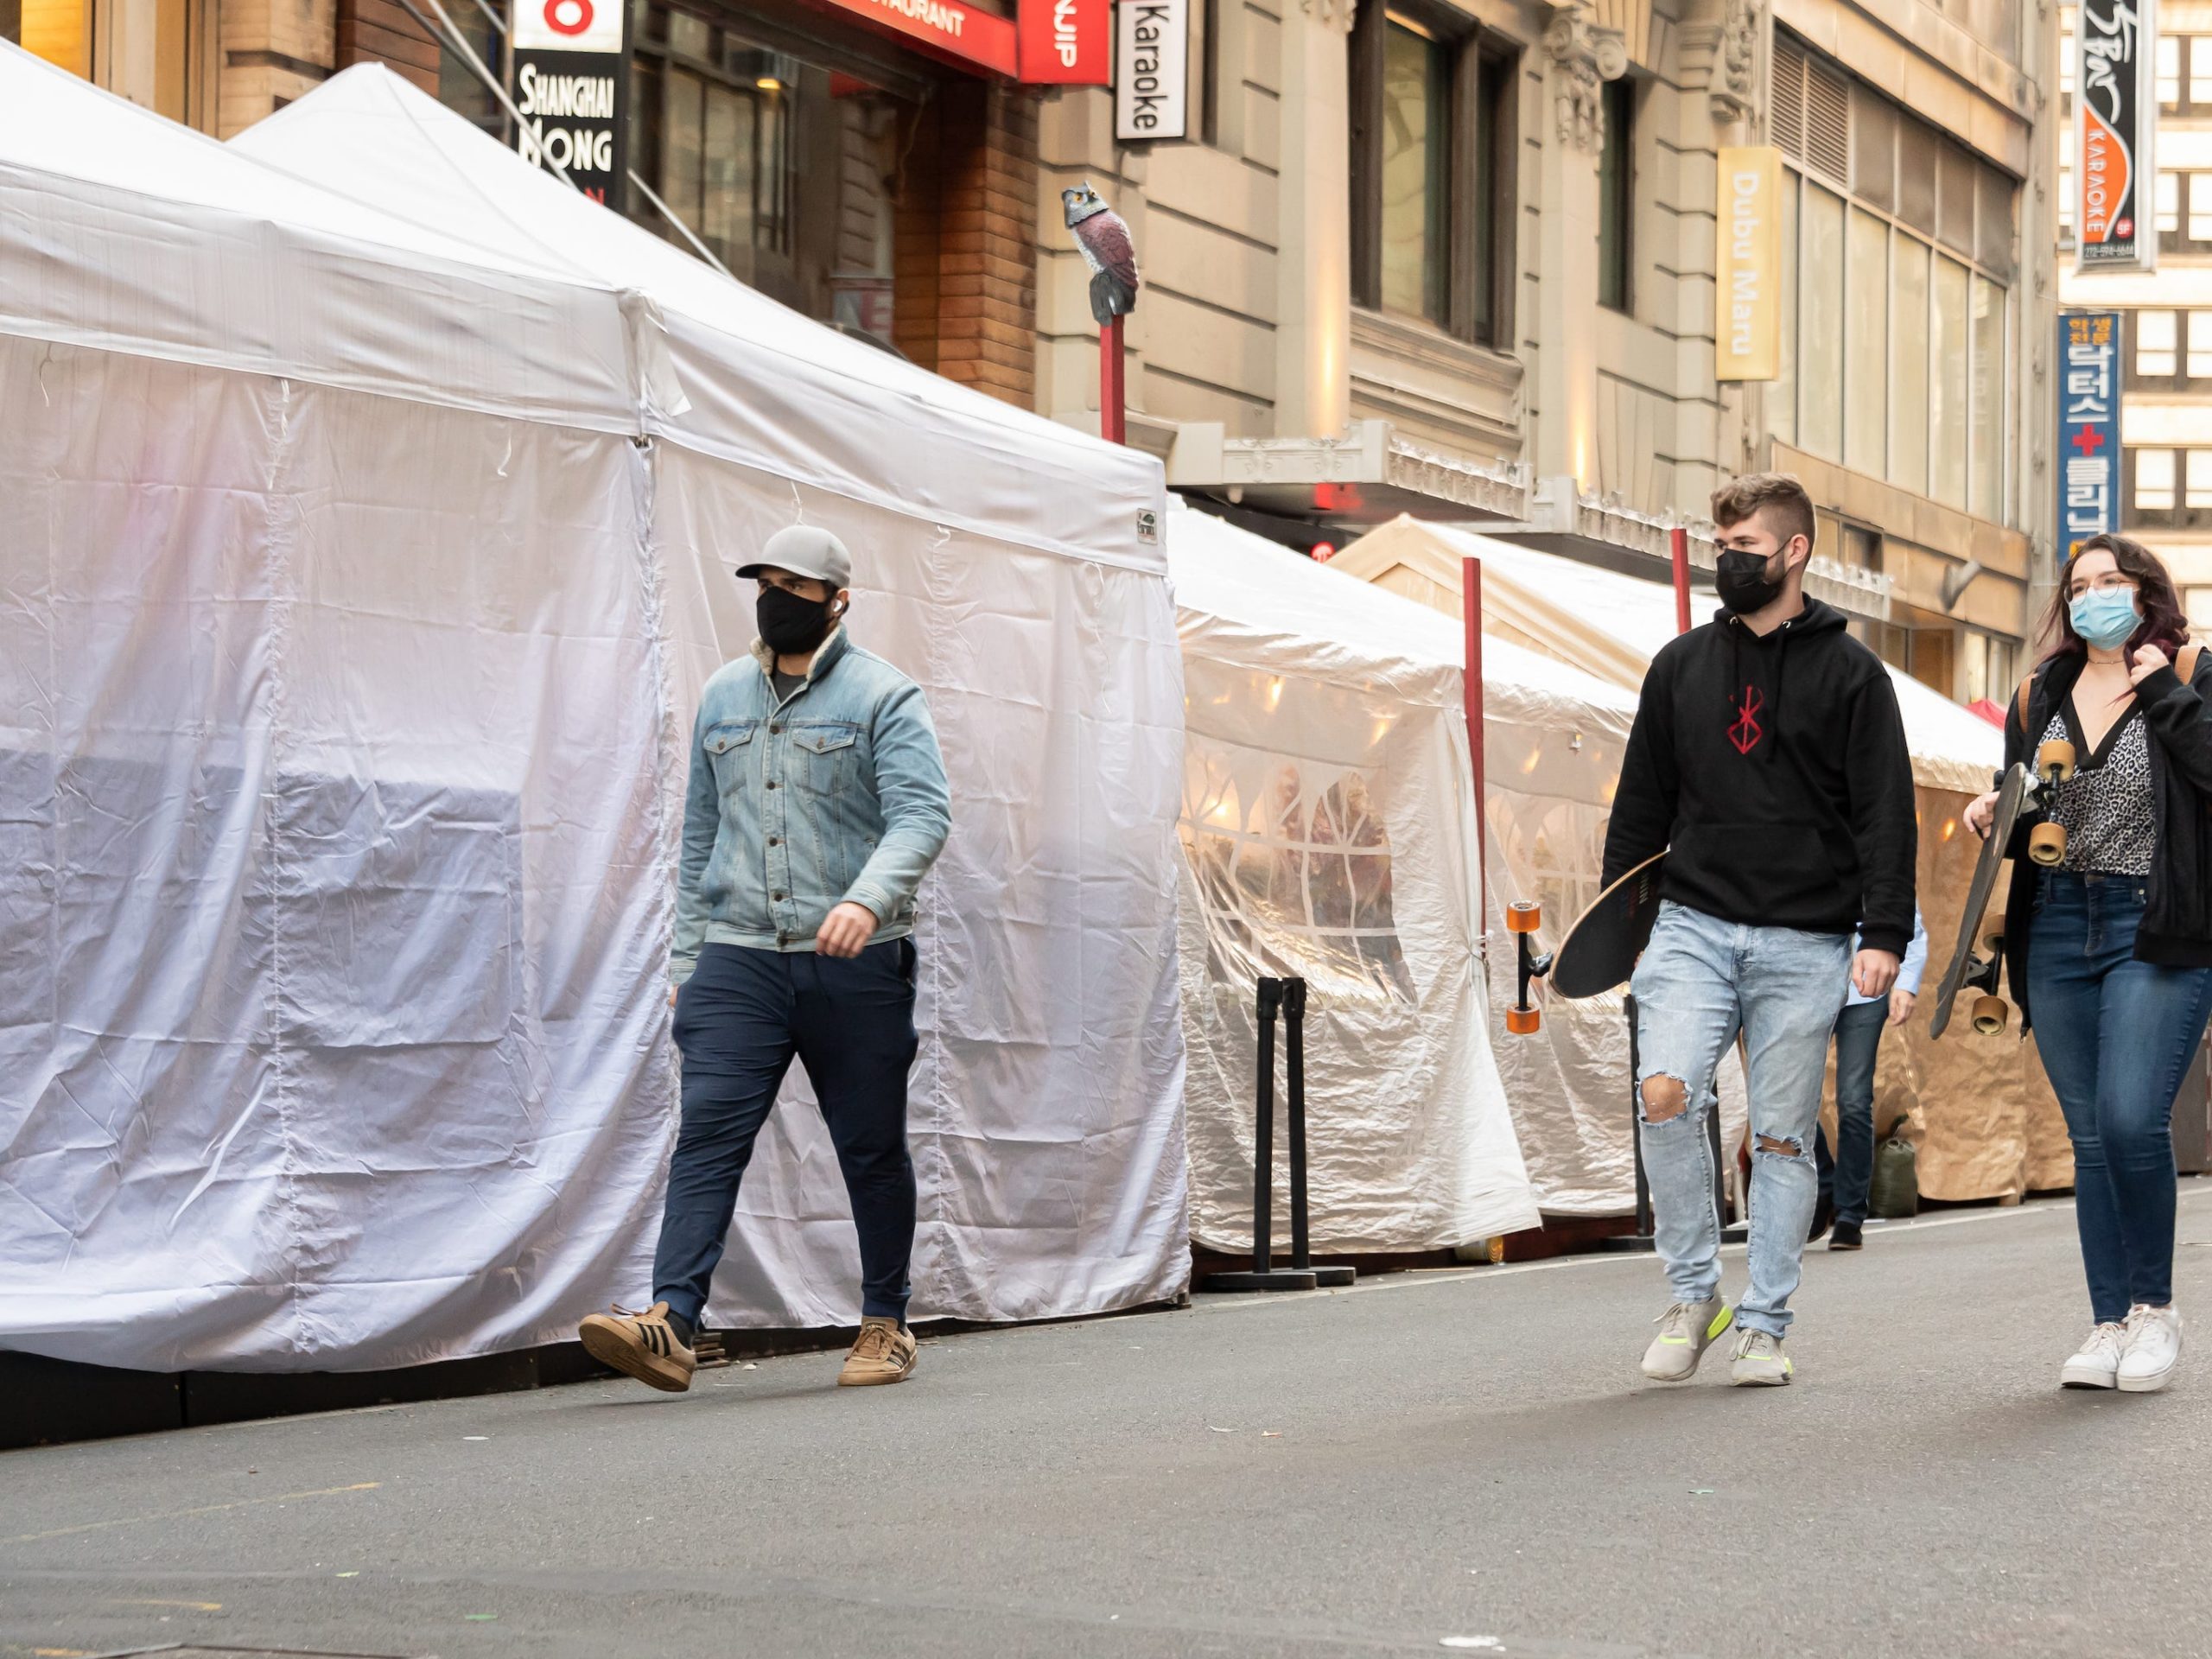 Photos of people walking by covered outdoor dining tents in New York City.